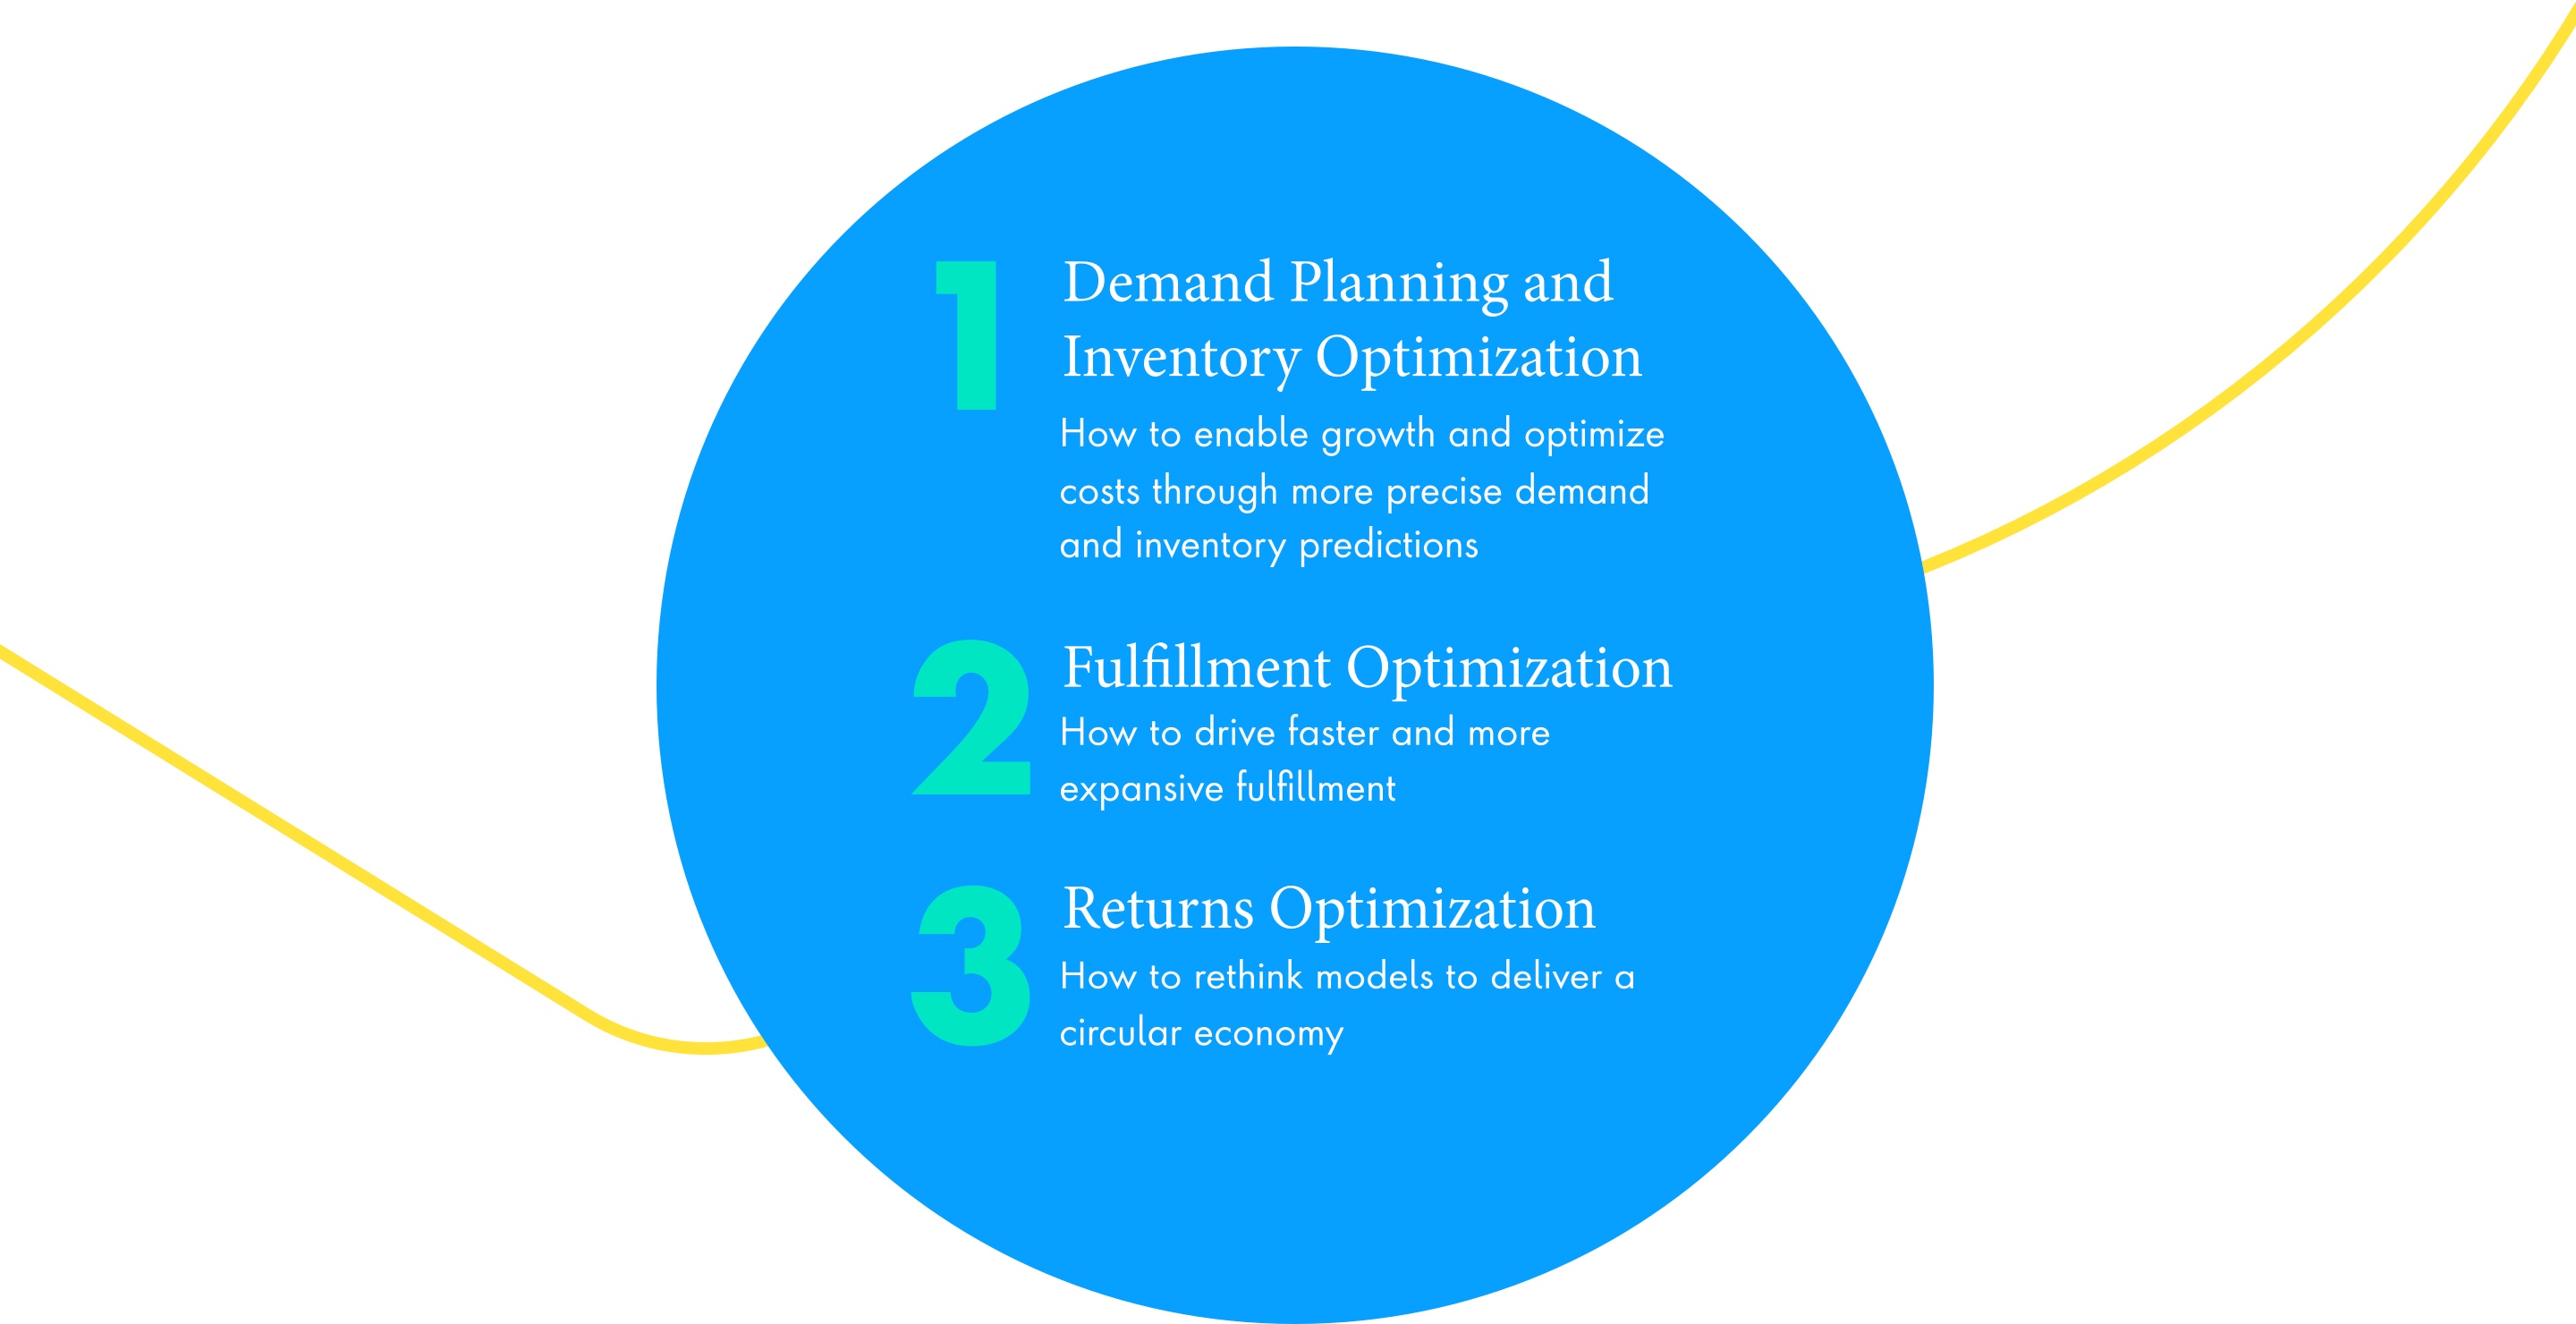 1.	Demand Planning and Inventory Optimization: How to enable growth and optimize costs through more precise demand and inventory predictions  2.	Fulfilment Optimization: How to drive faster and more expansive fulfillment  3.	Returns Optimization: How to rethink models to deliver a circular economy